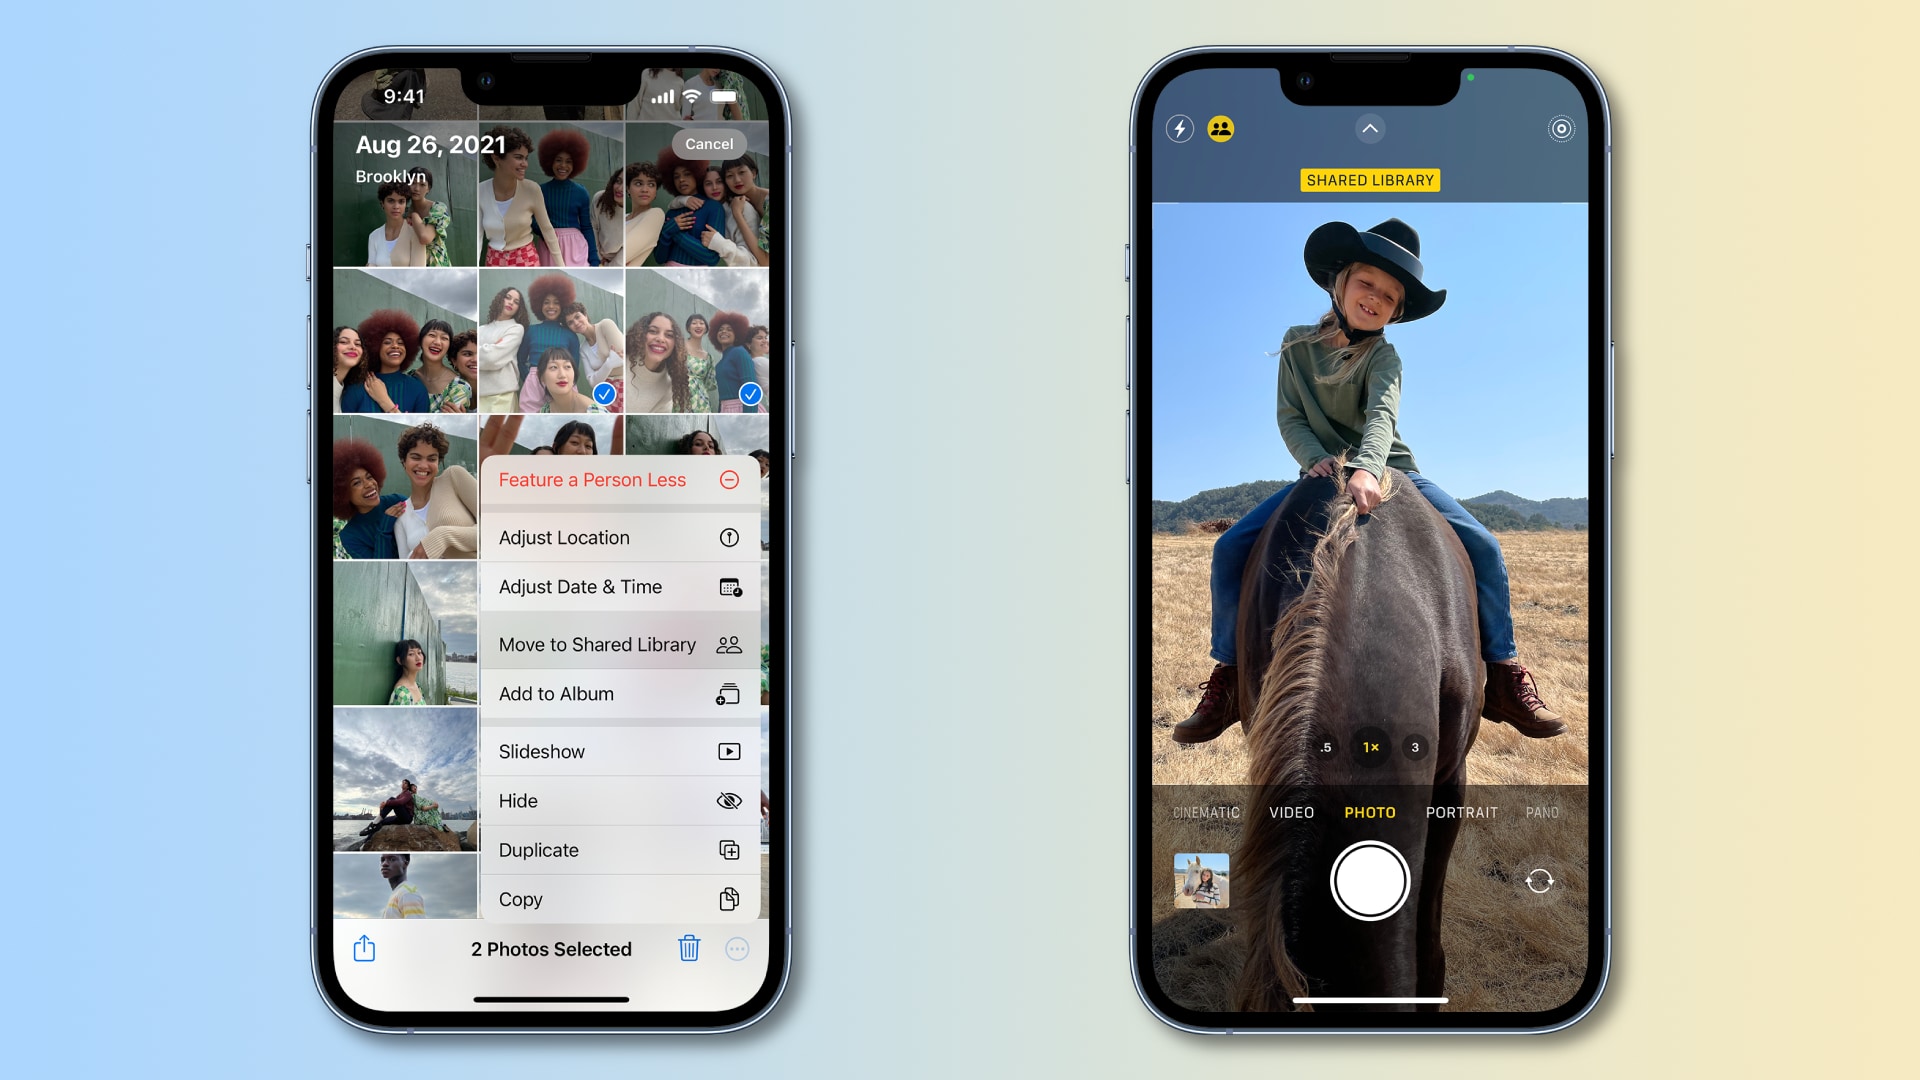 iOS 16.4’s Photos app detects duplicates in your shared image library